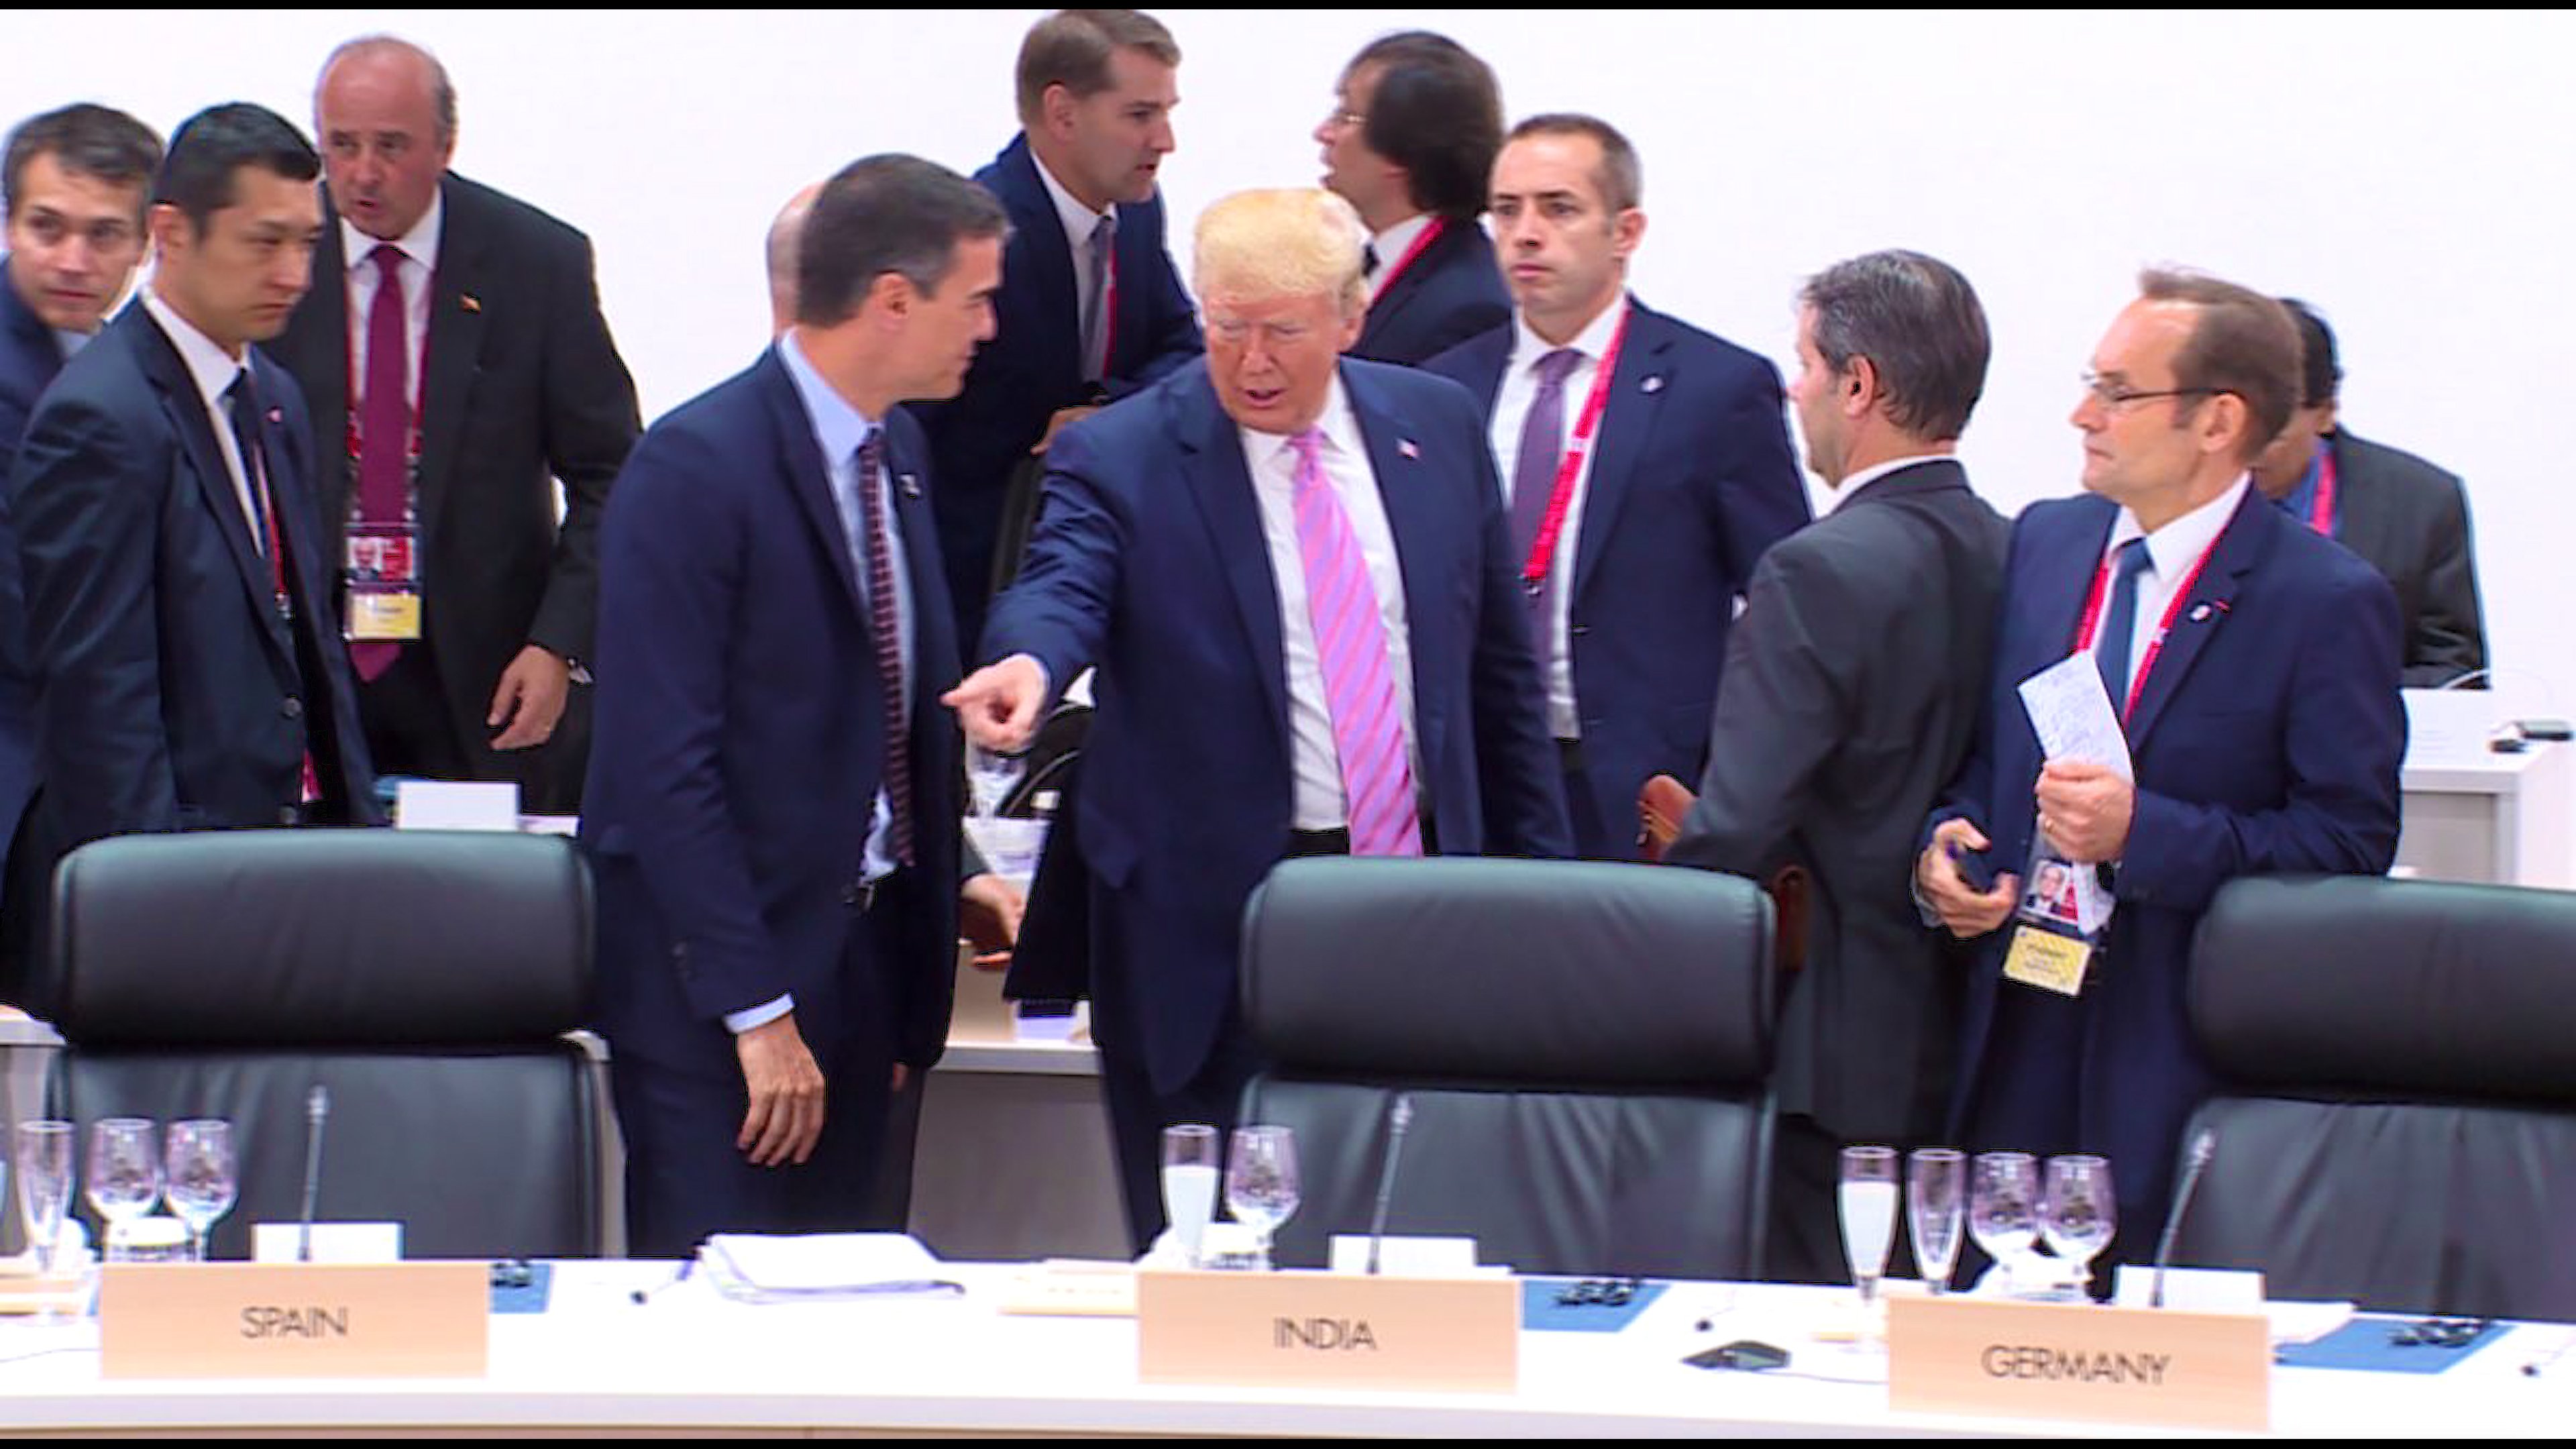 Trump makes Sánchez sit down and Spanish government denies it